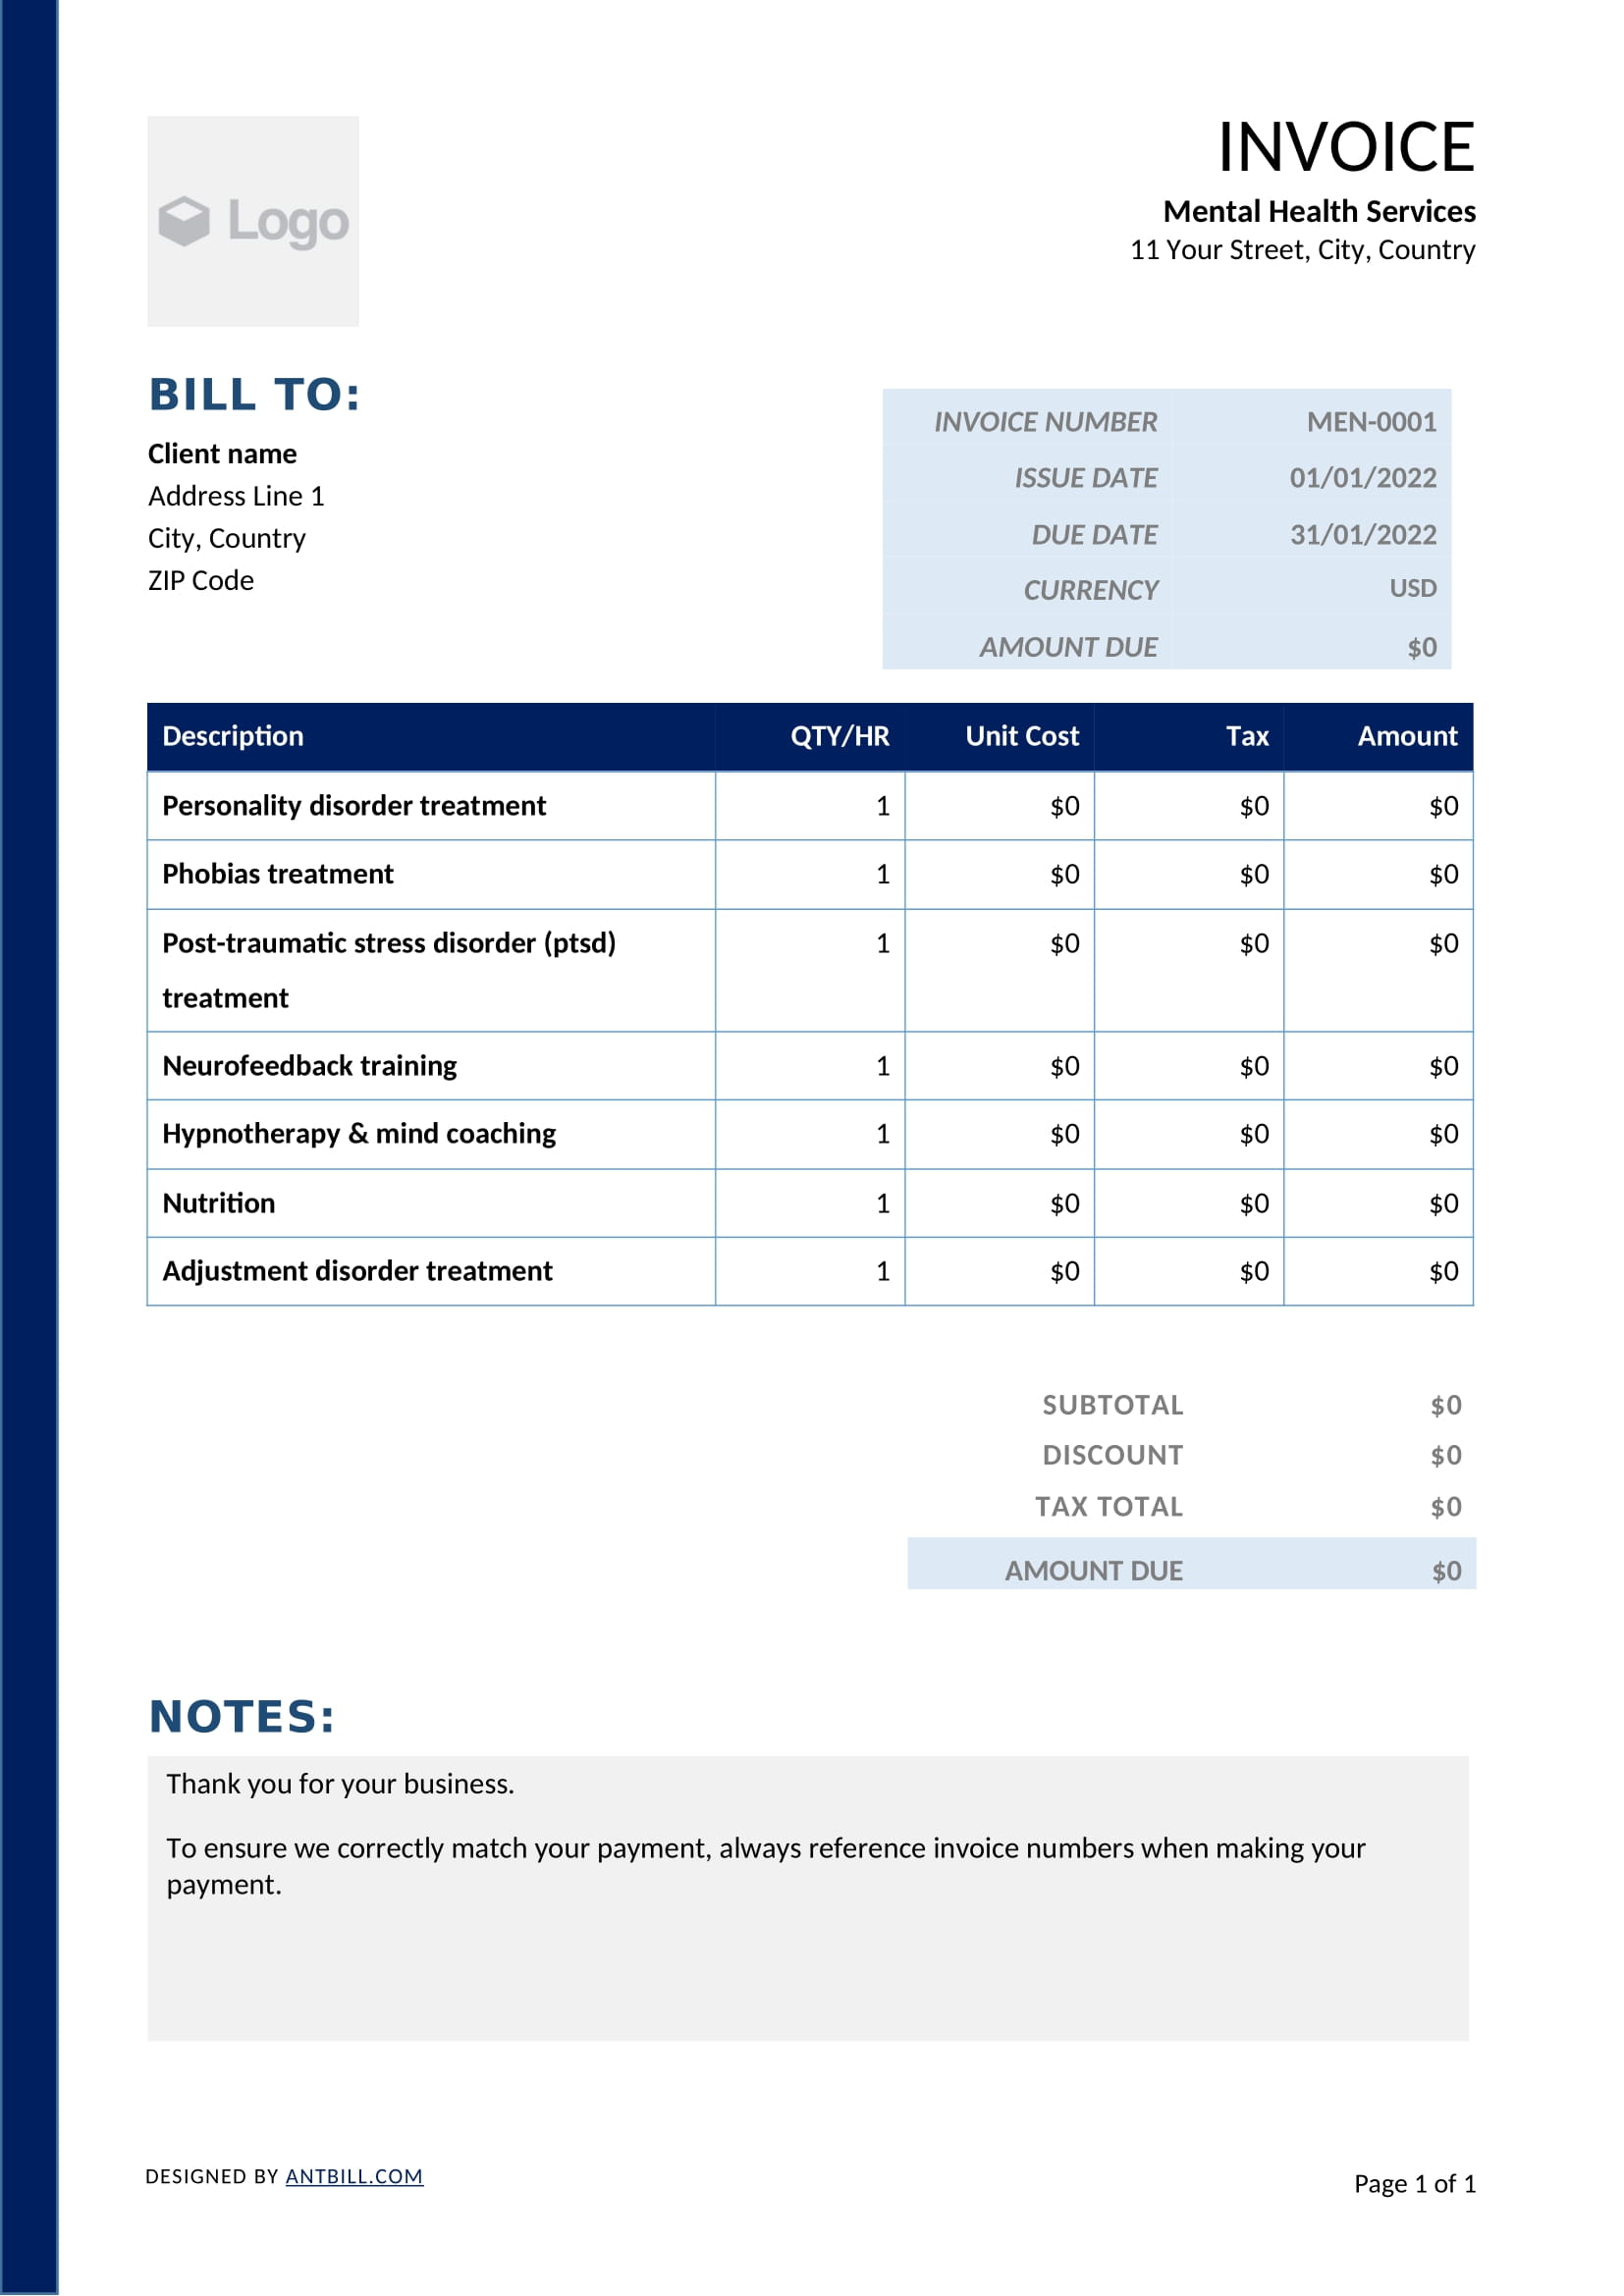 Mental Health Services Invoice Template - professional